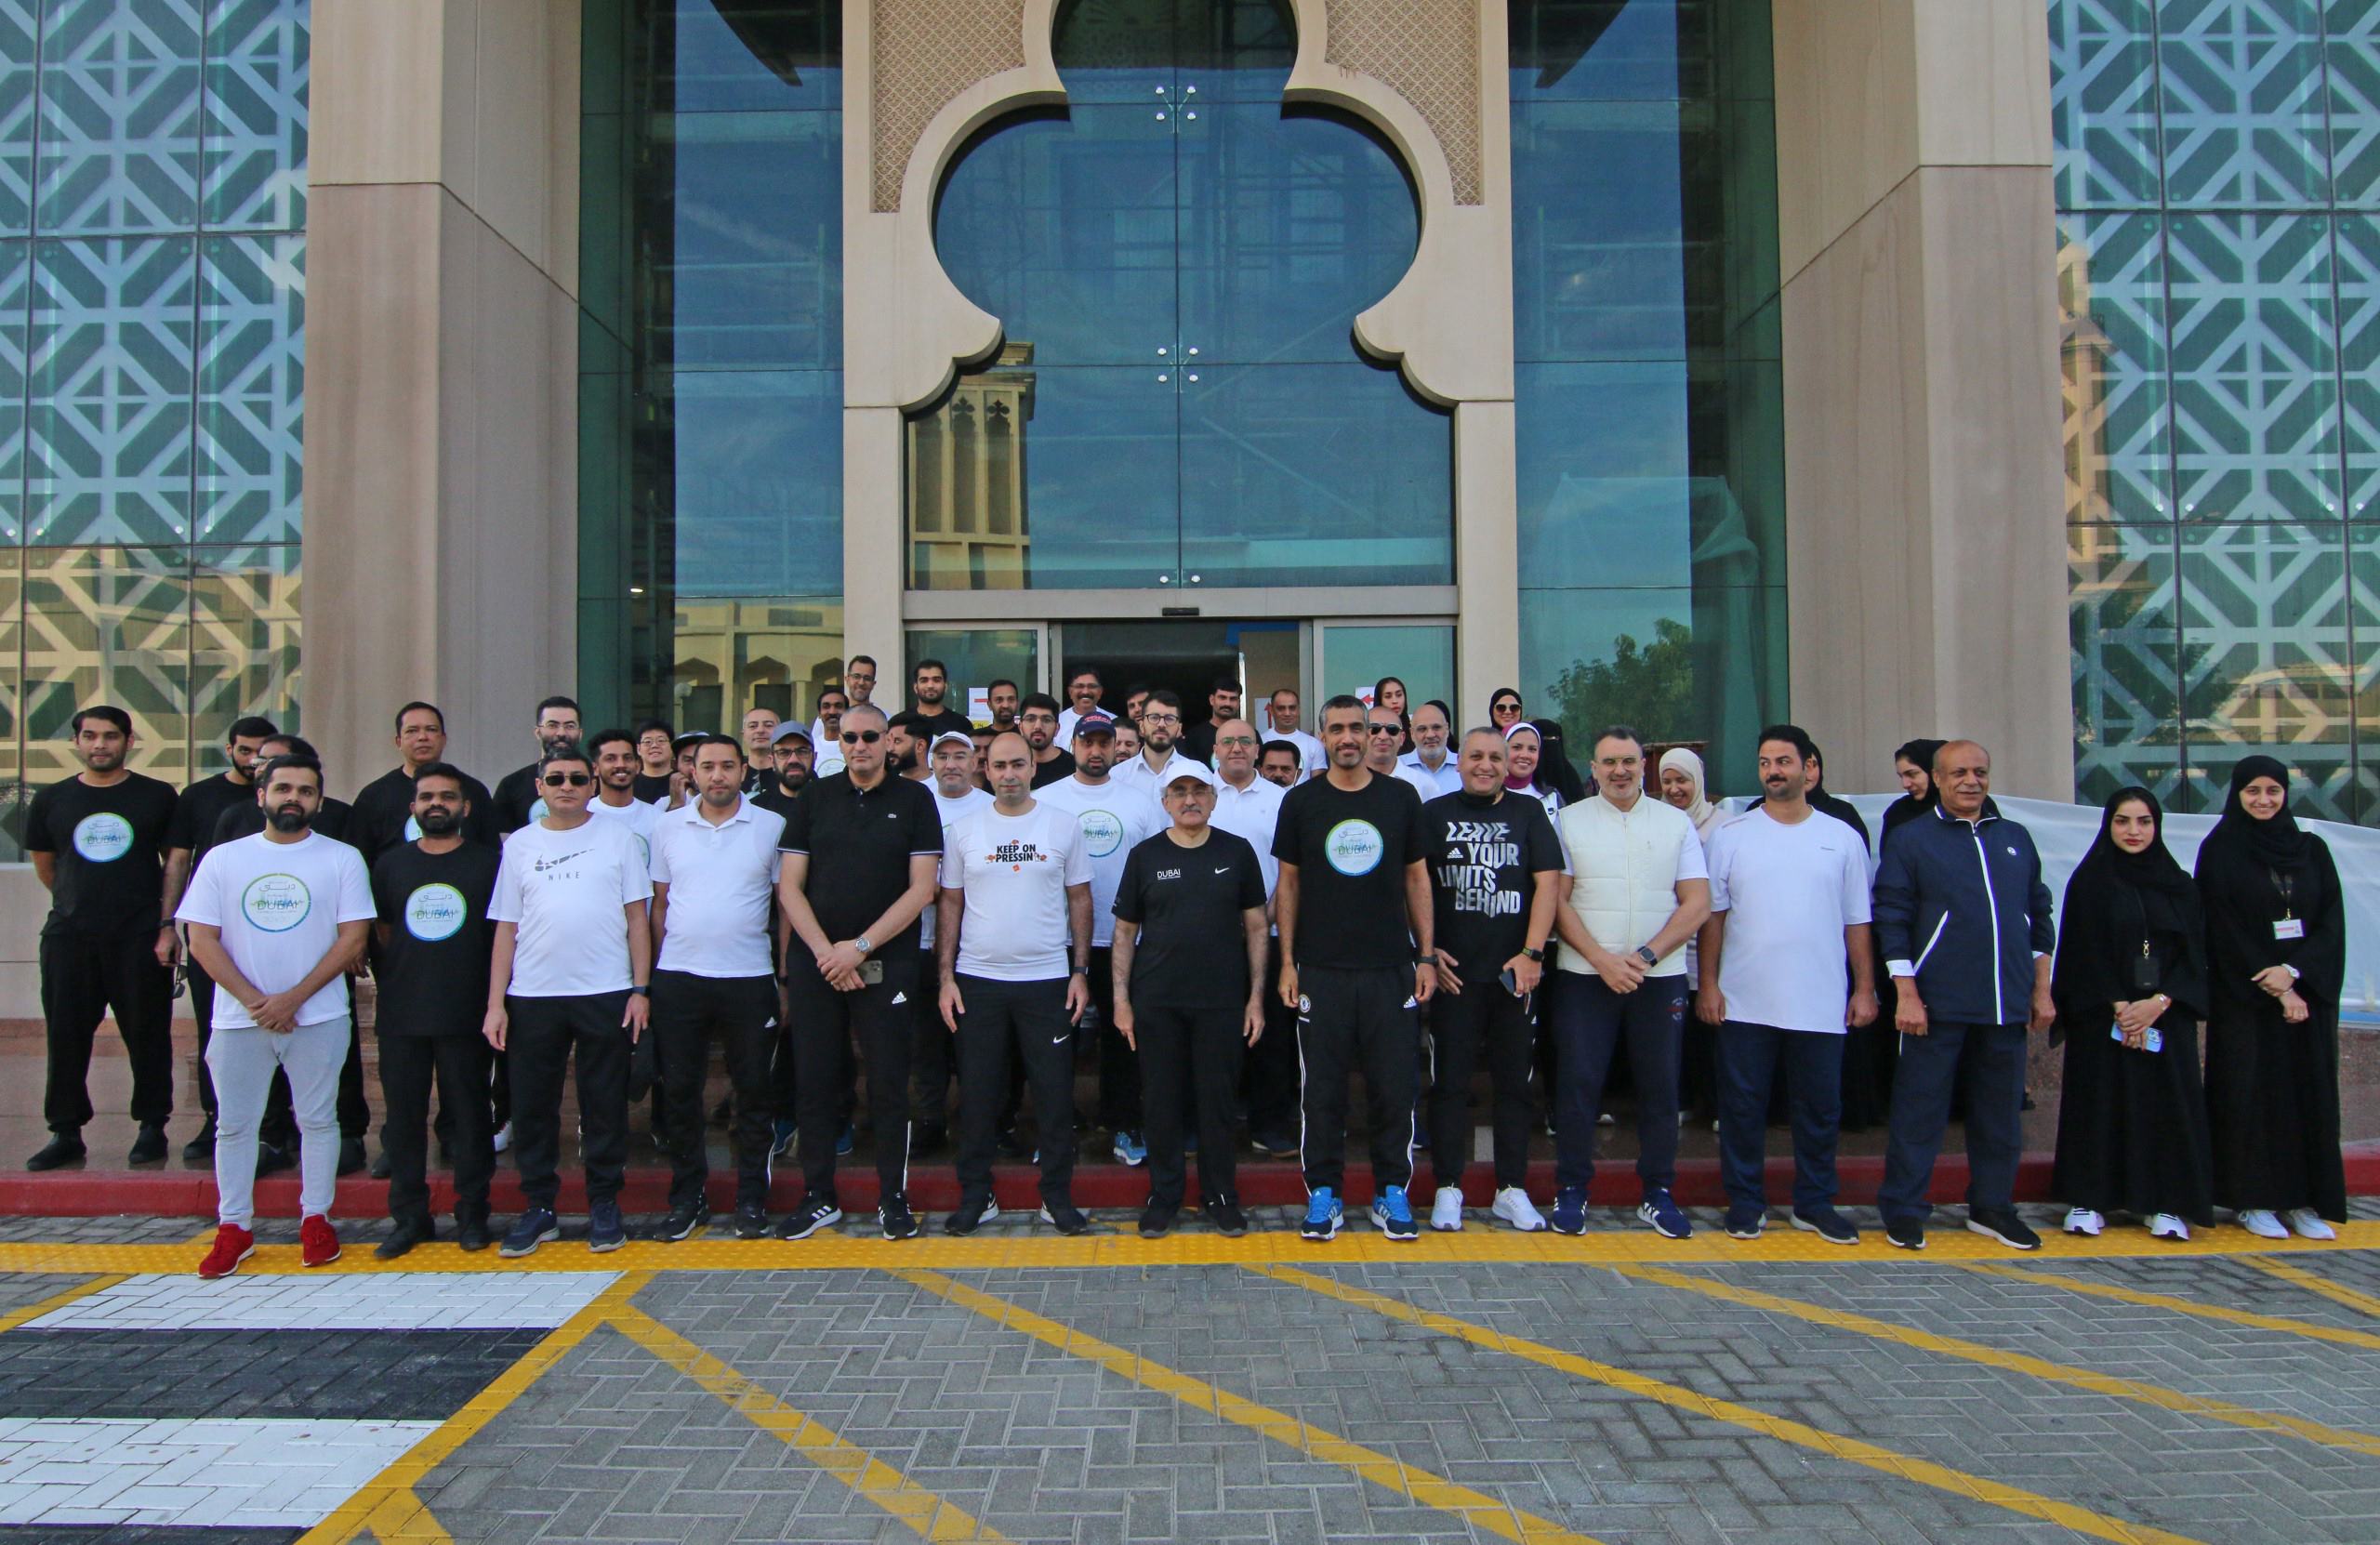 The Government of Dubai Legal Affairs Department Organizes a Sports Event as Part of “Dubai Fitness Challenge”